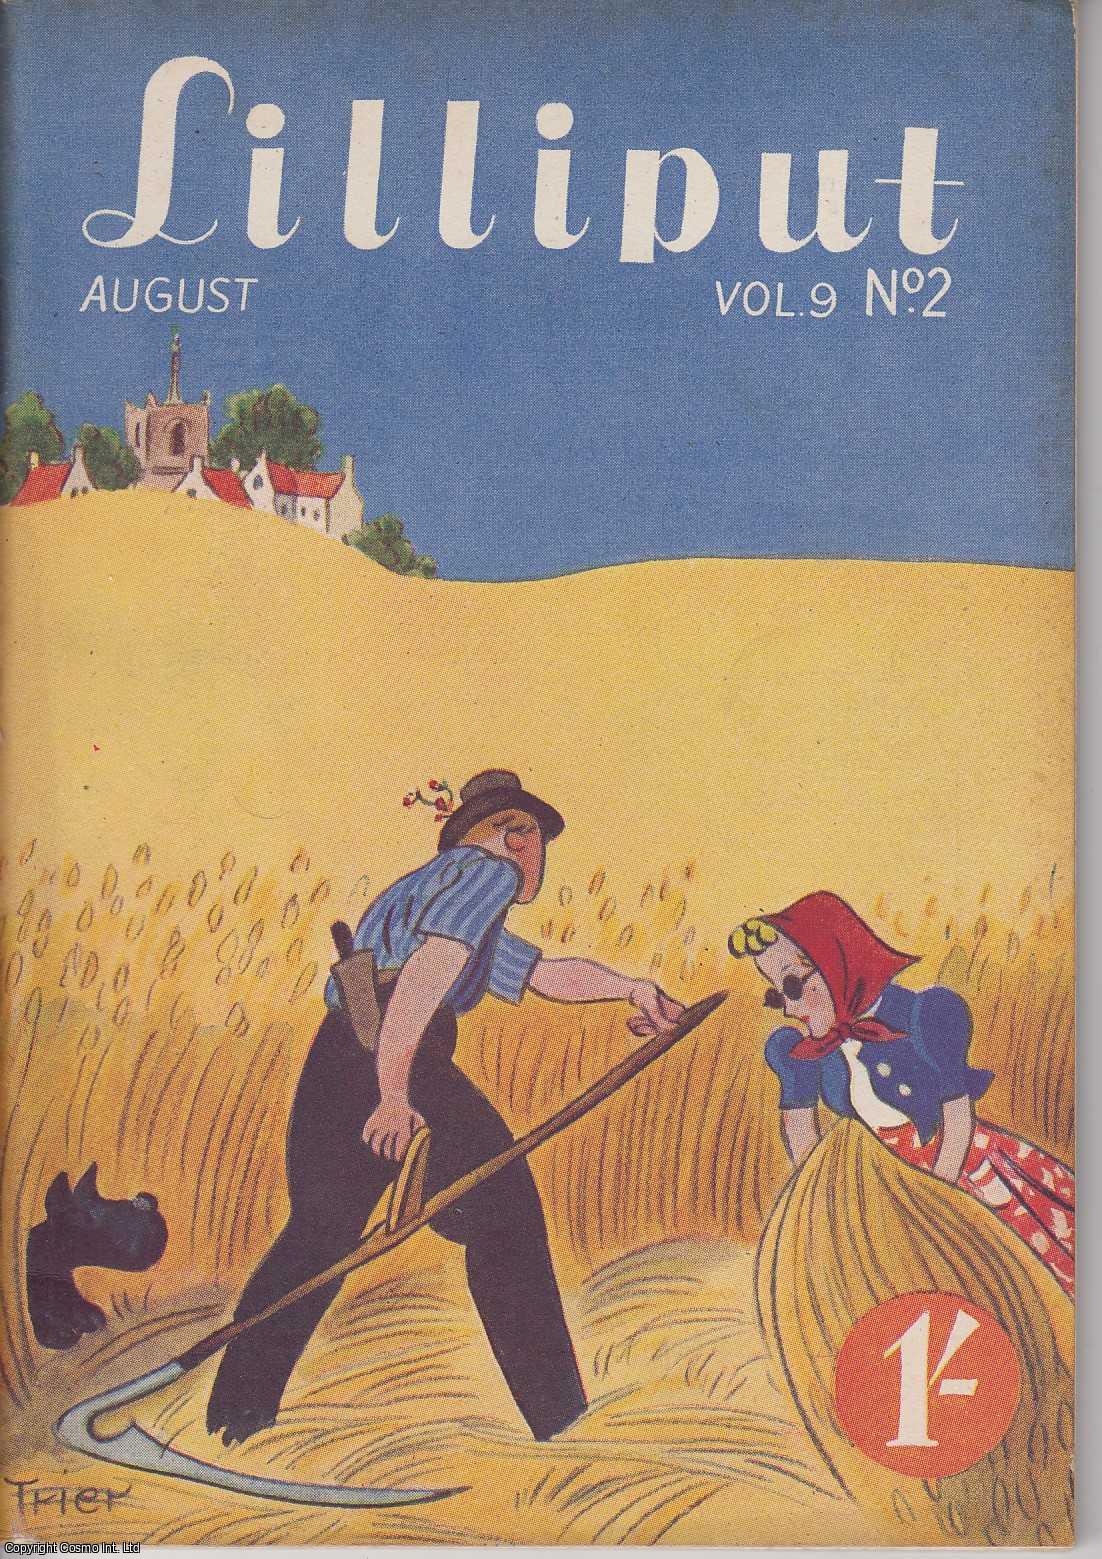 Lilliput - Lilliput Magazine. August 1941. Vol.9 no.2 Issue no.50. Lemuel Gulliver, Martin Freud, Peter Opie, and other pieces.